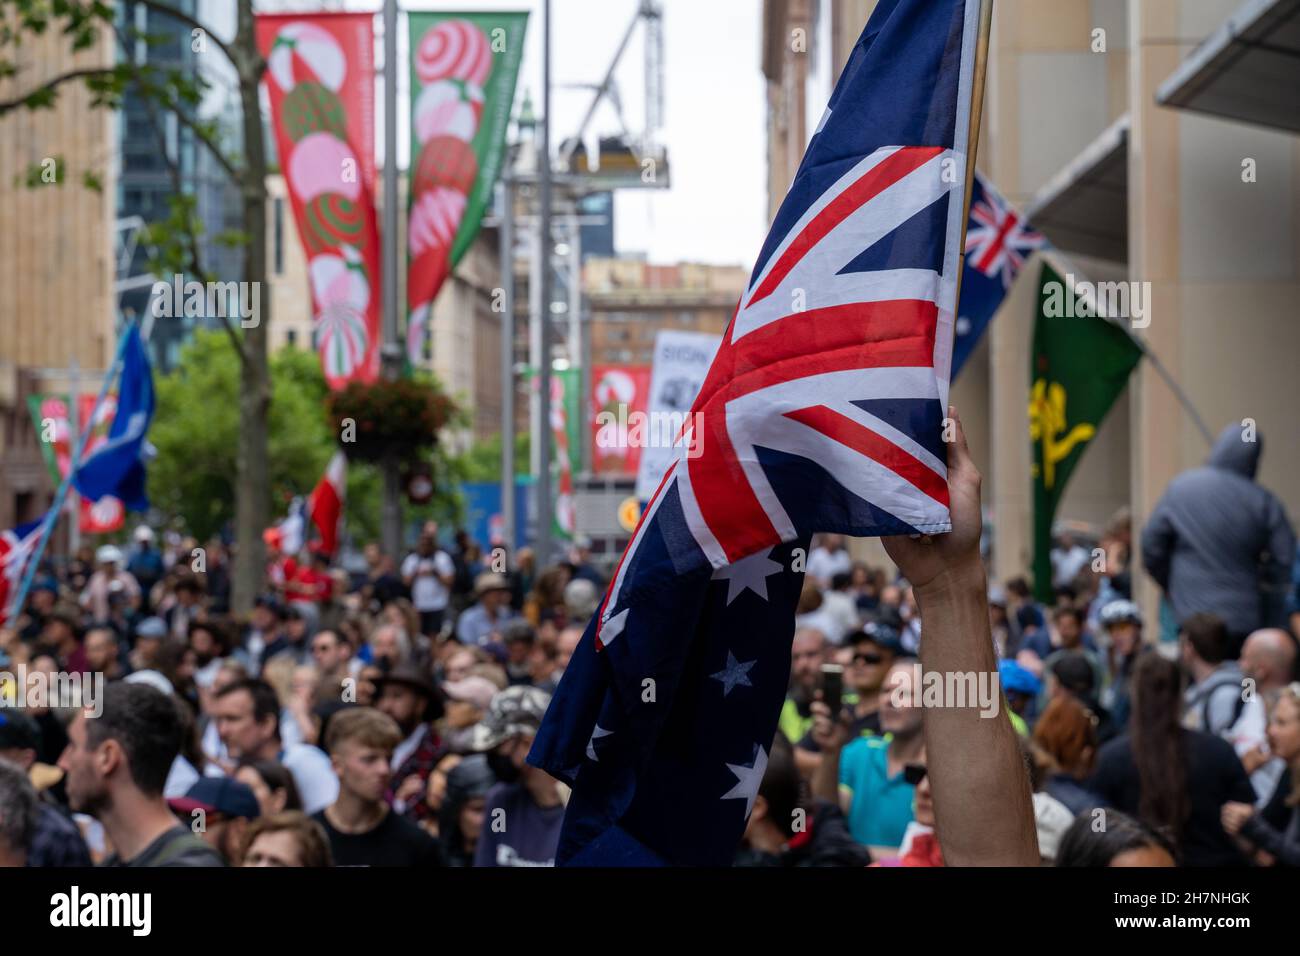 Protest rally against government policies in Australia, Sydney, Martin Place 20 Nov 2021. People holding Australian flag. Stock Photo